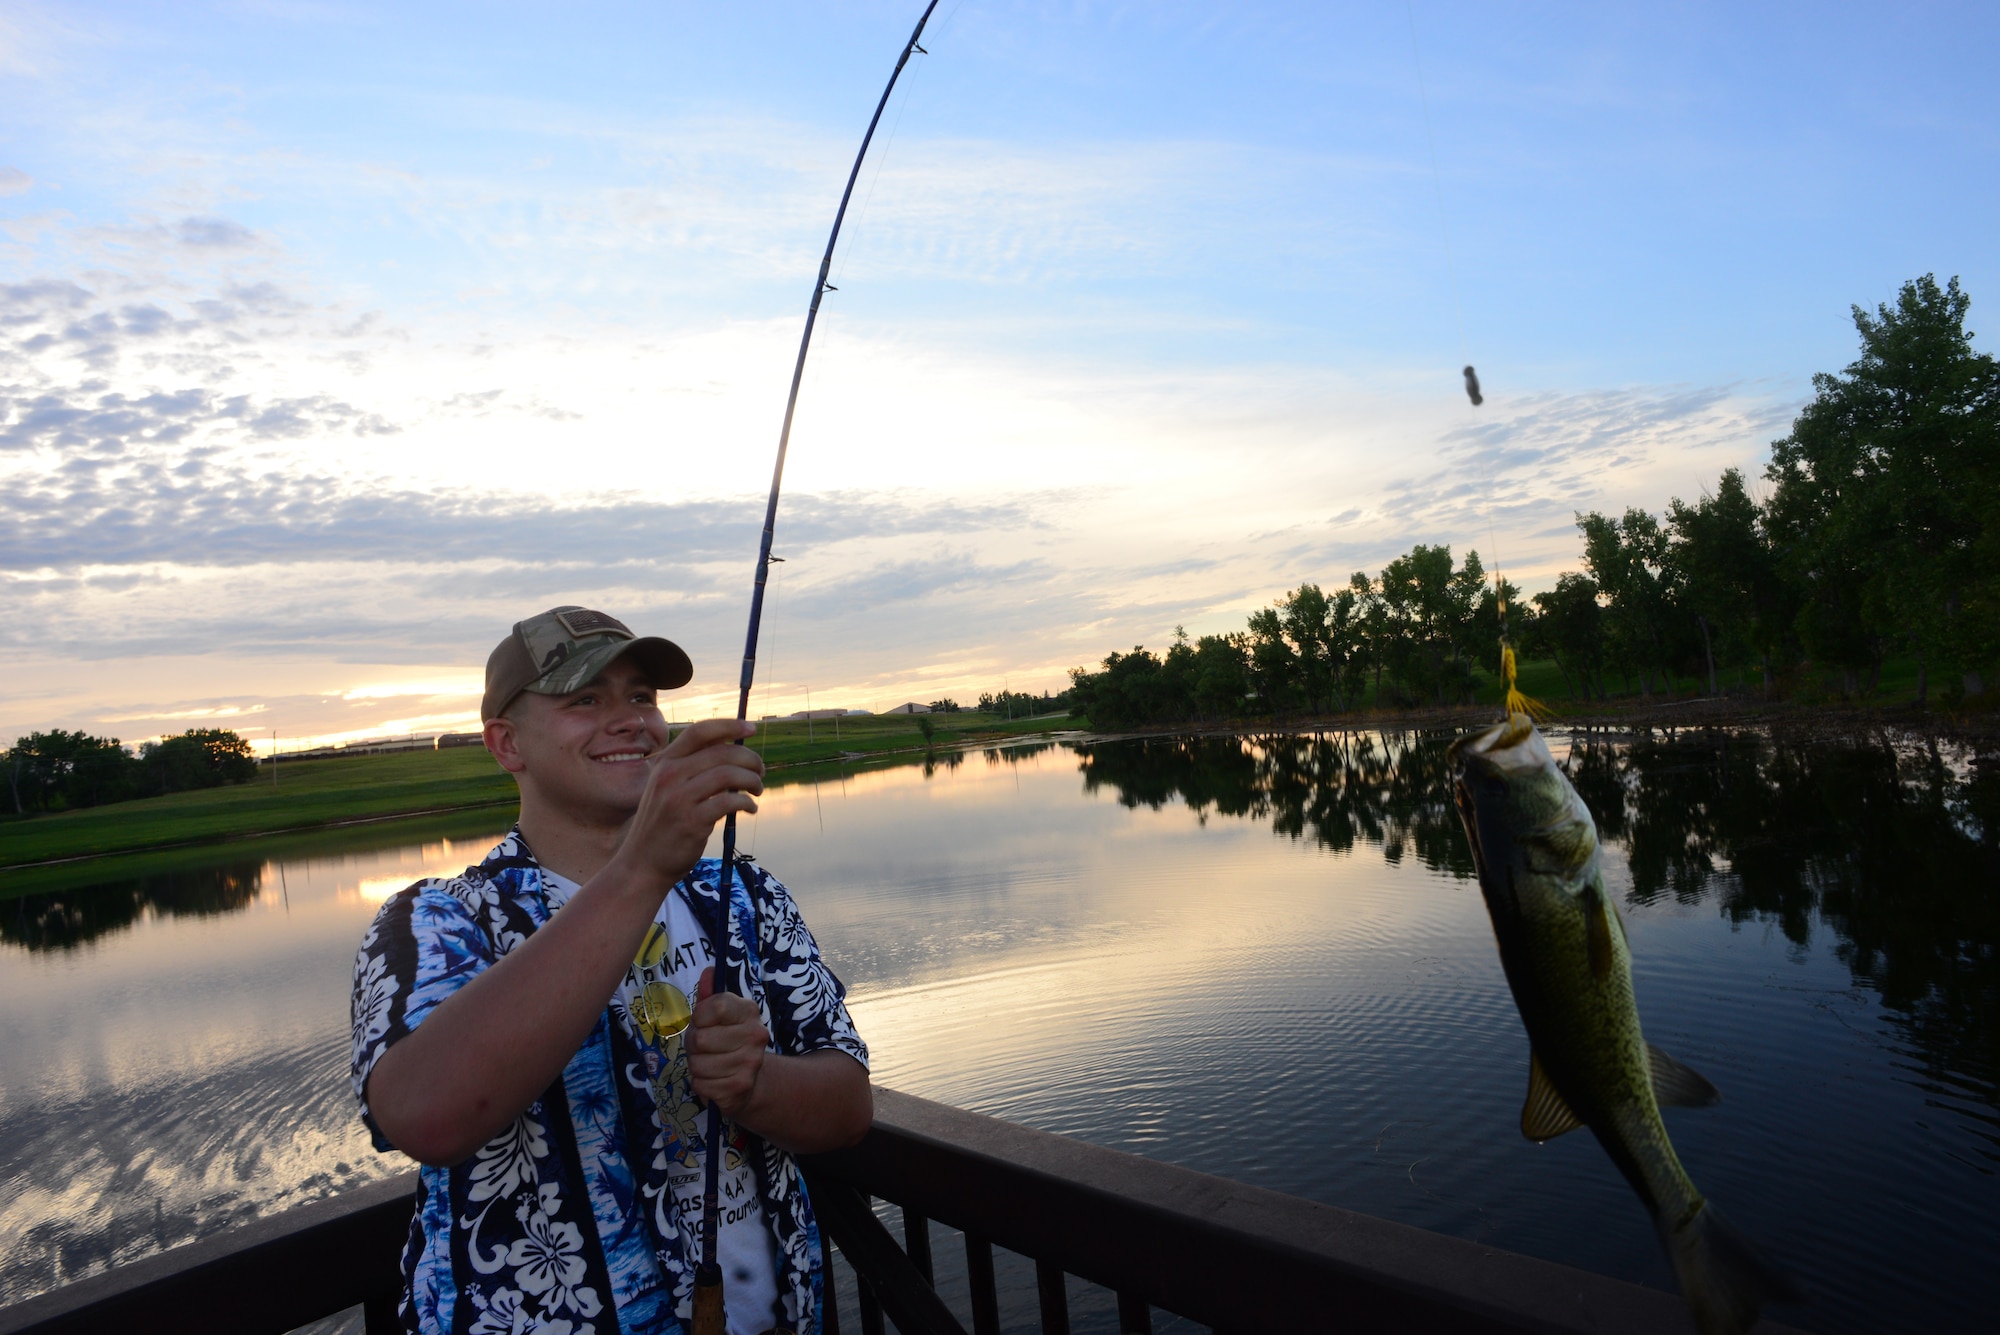 Airman John Ennis, a 28th Bomb Wing Public Affairs broadcast journalist, catches a bass at Gateway Lake on Ellsworth Air Force Base, S.D., July 12, 2018. Any person with installation access is allowed to fish at the base lakes if they have a valid South Dakota fishing license and base fishing permit. (U.S. Air Force photo by Airman 1st Class Nicolas Z. Erwin)